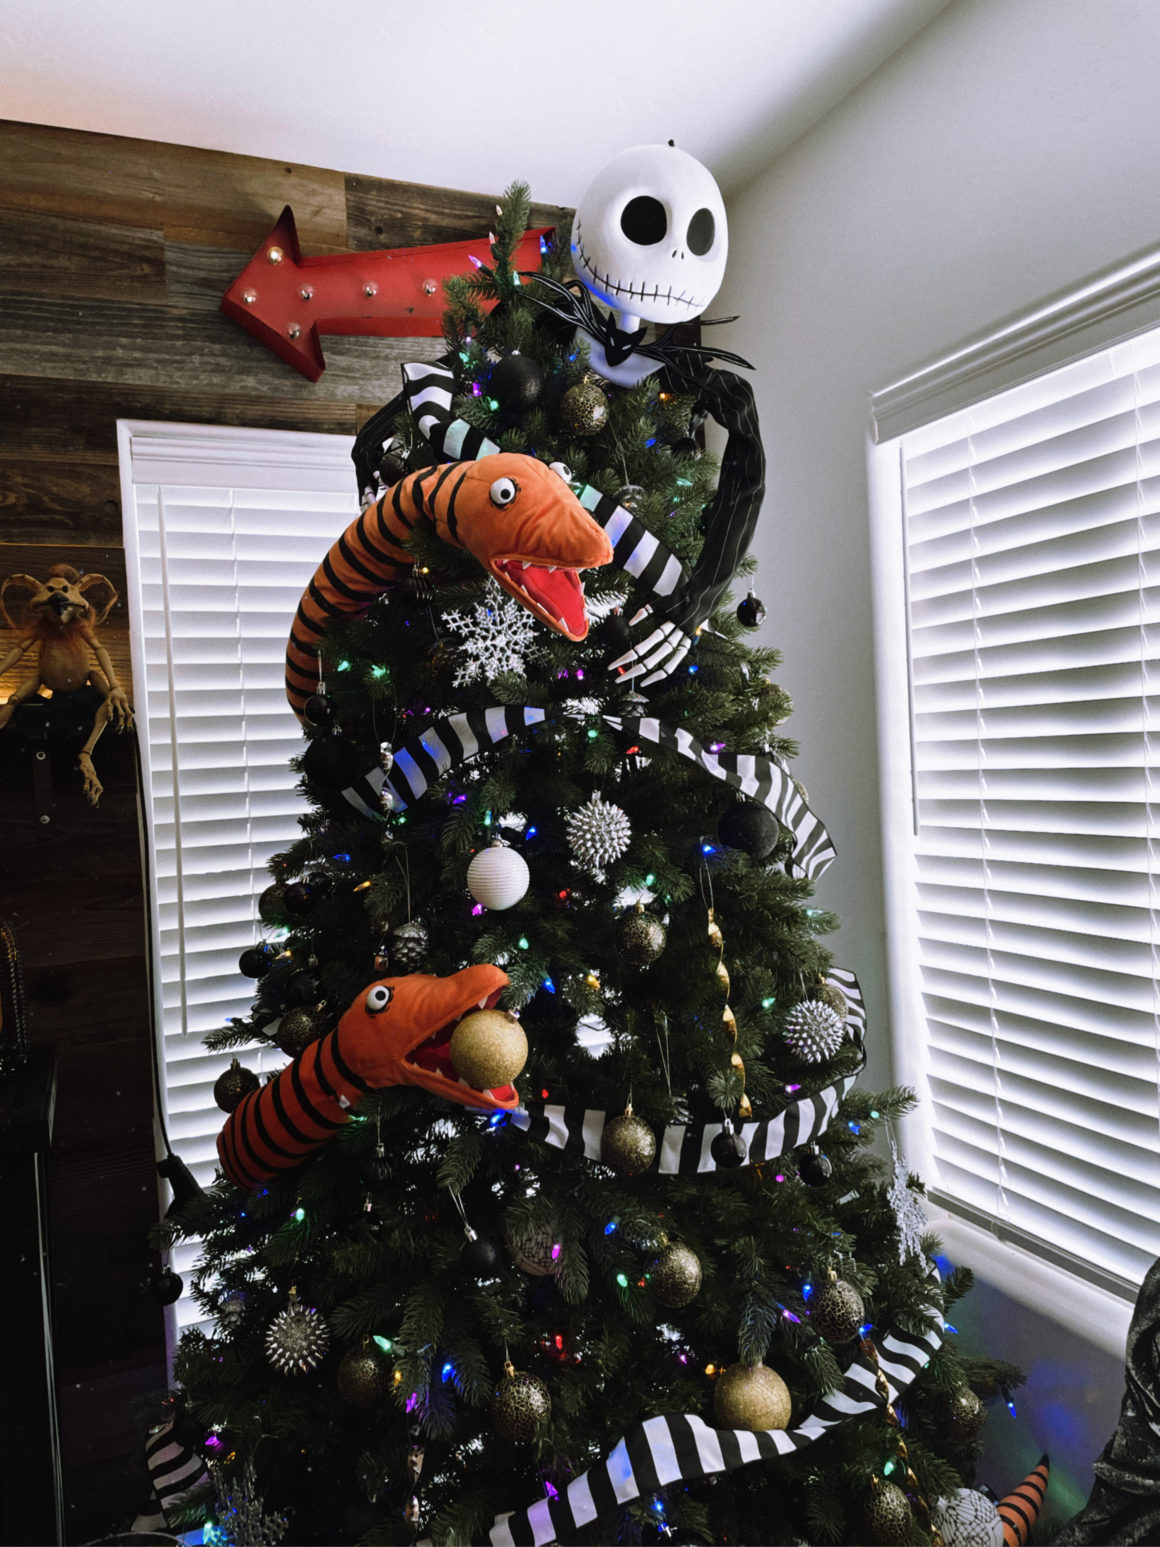 How to the nightmare before christmas decor your home with a spooky touch